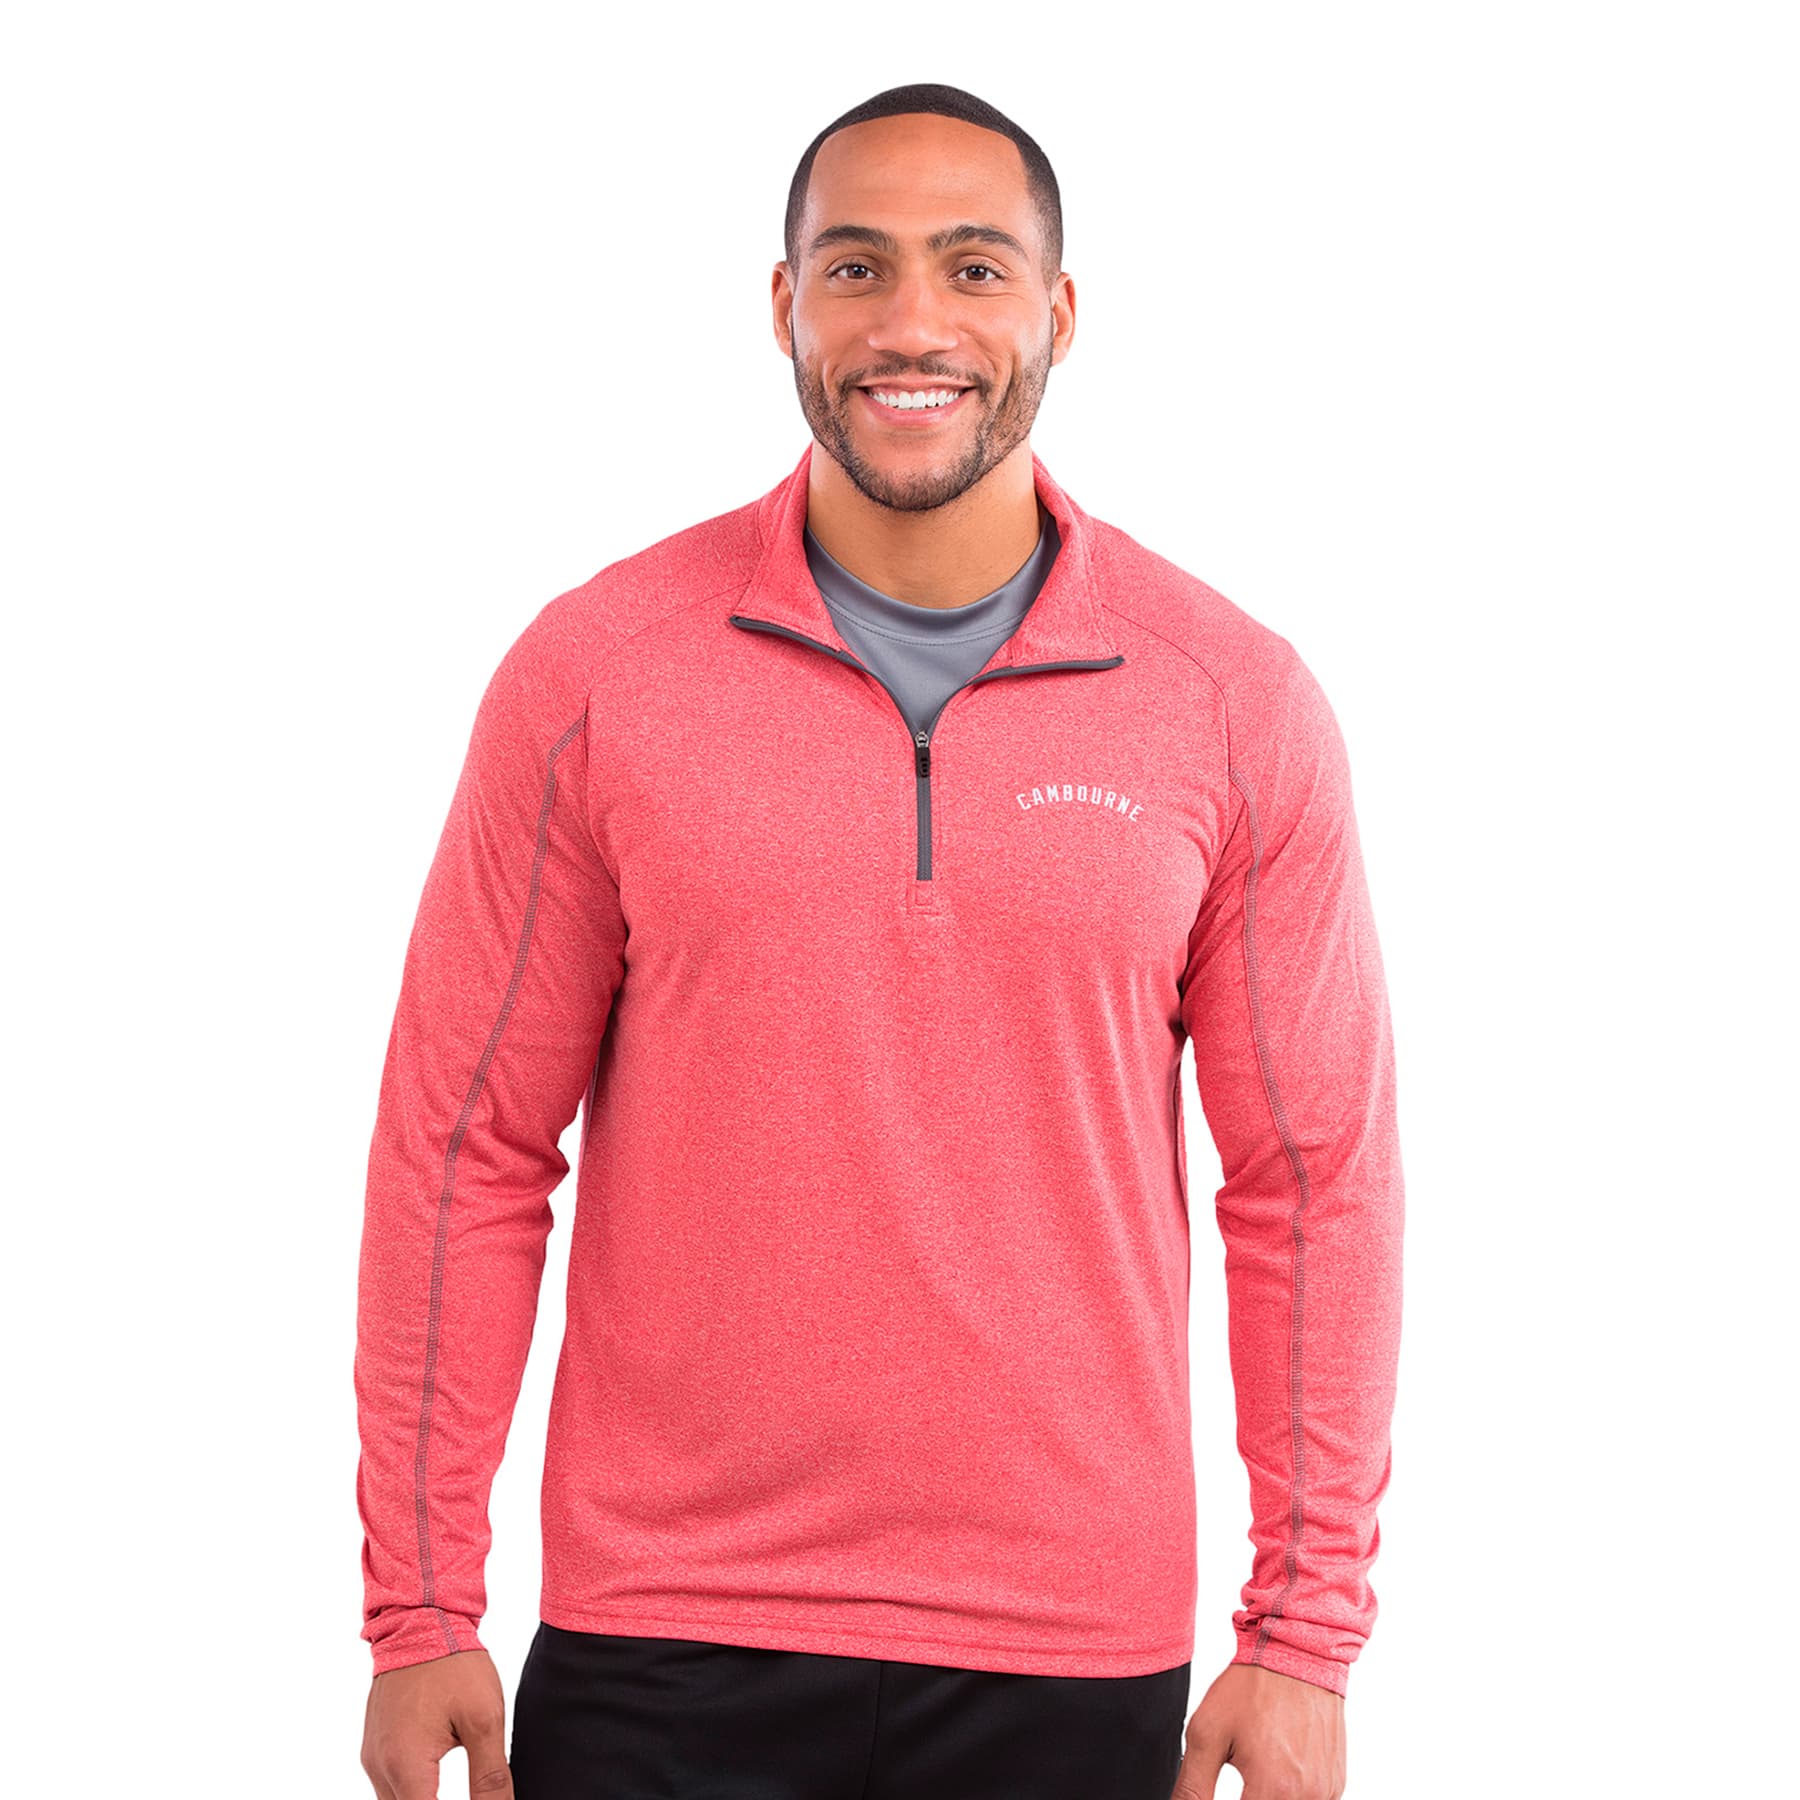 Taza Knit Quarter Zip - Mens - MONTYS PROMO PRODUCTS & CORPORATE ...